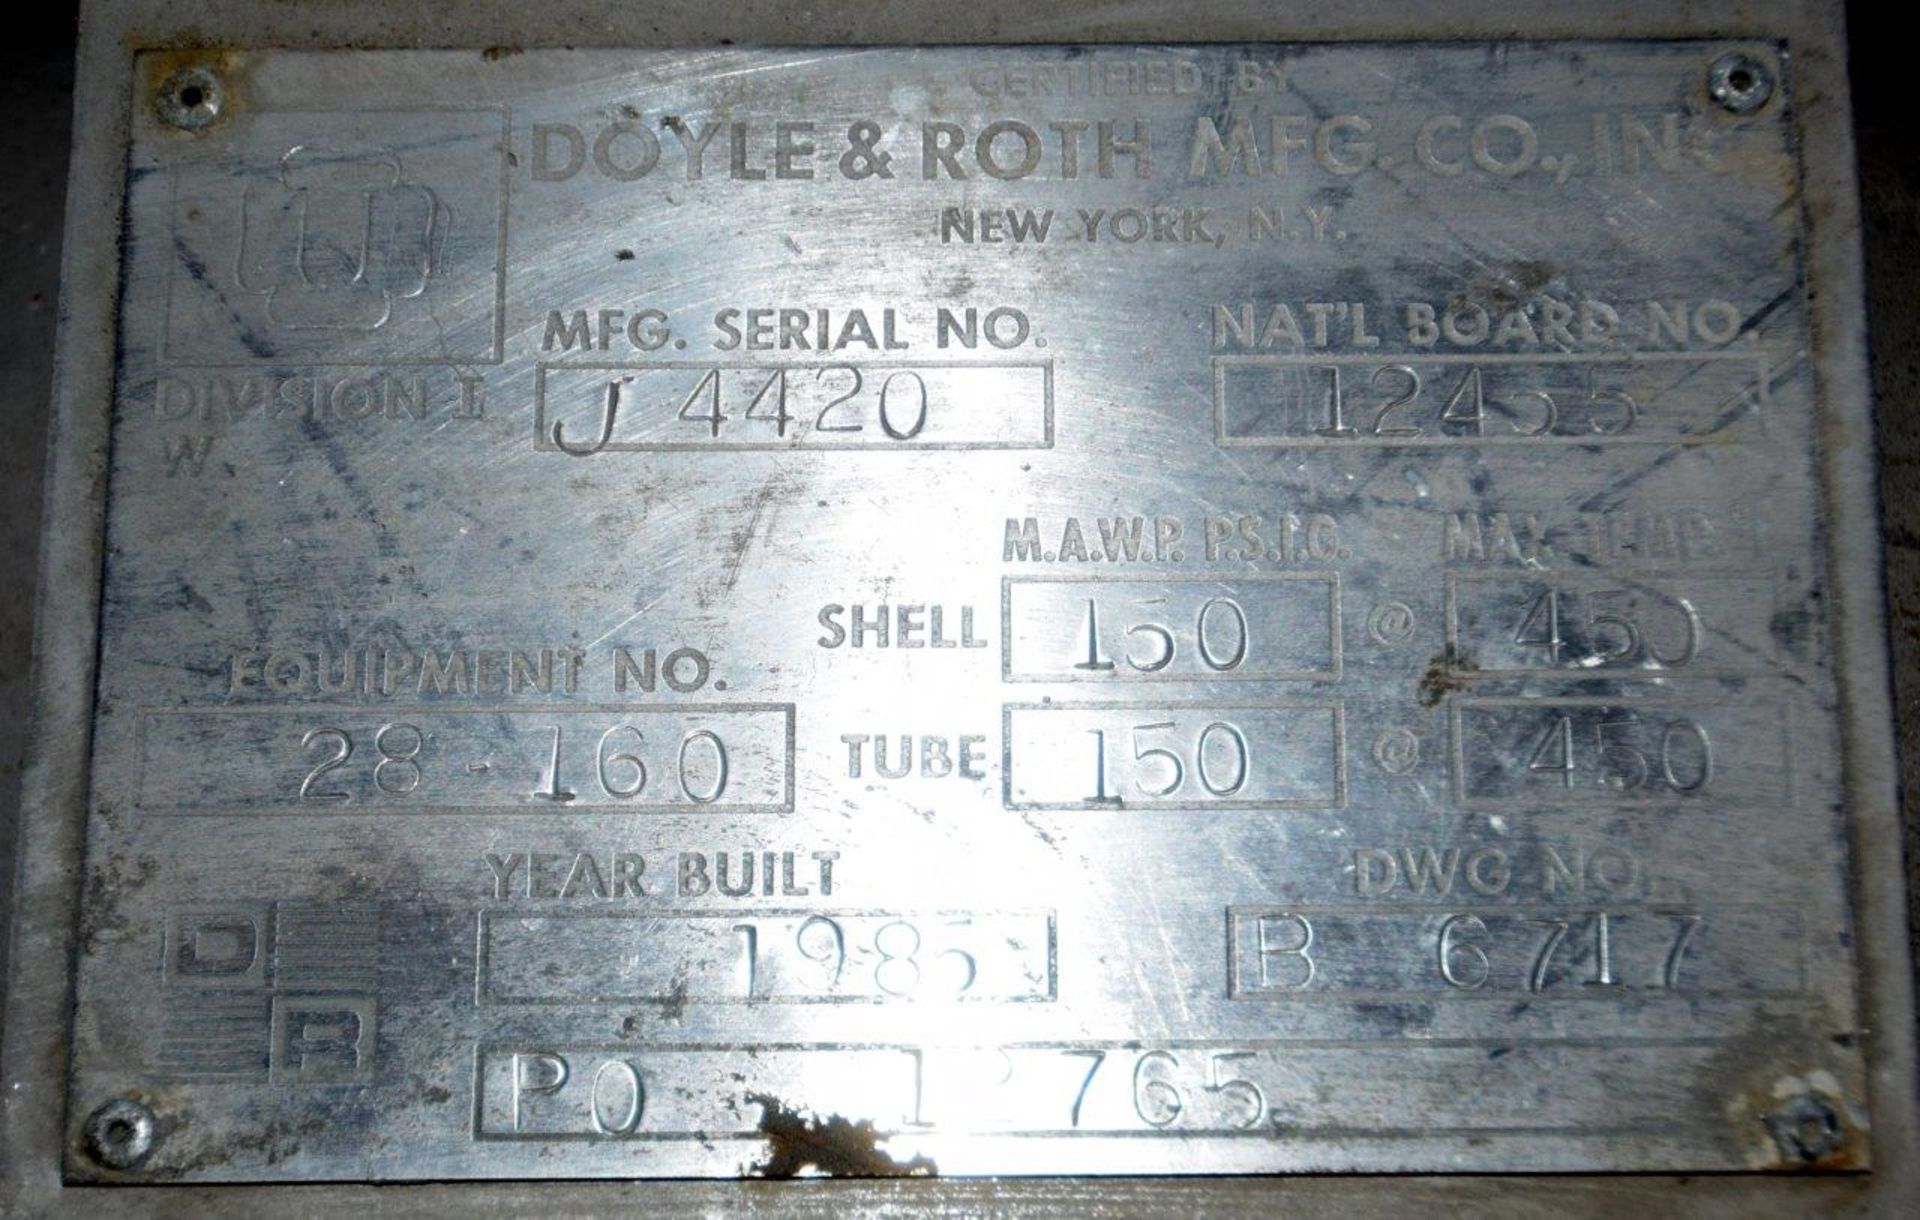 Doyle & Roth Stainless Steel Heat Exchanger, Shell and Tube Side 150 psi at 450 F., National - Image 2 of 2